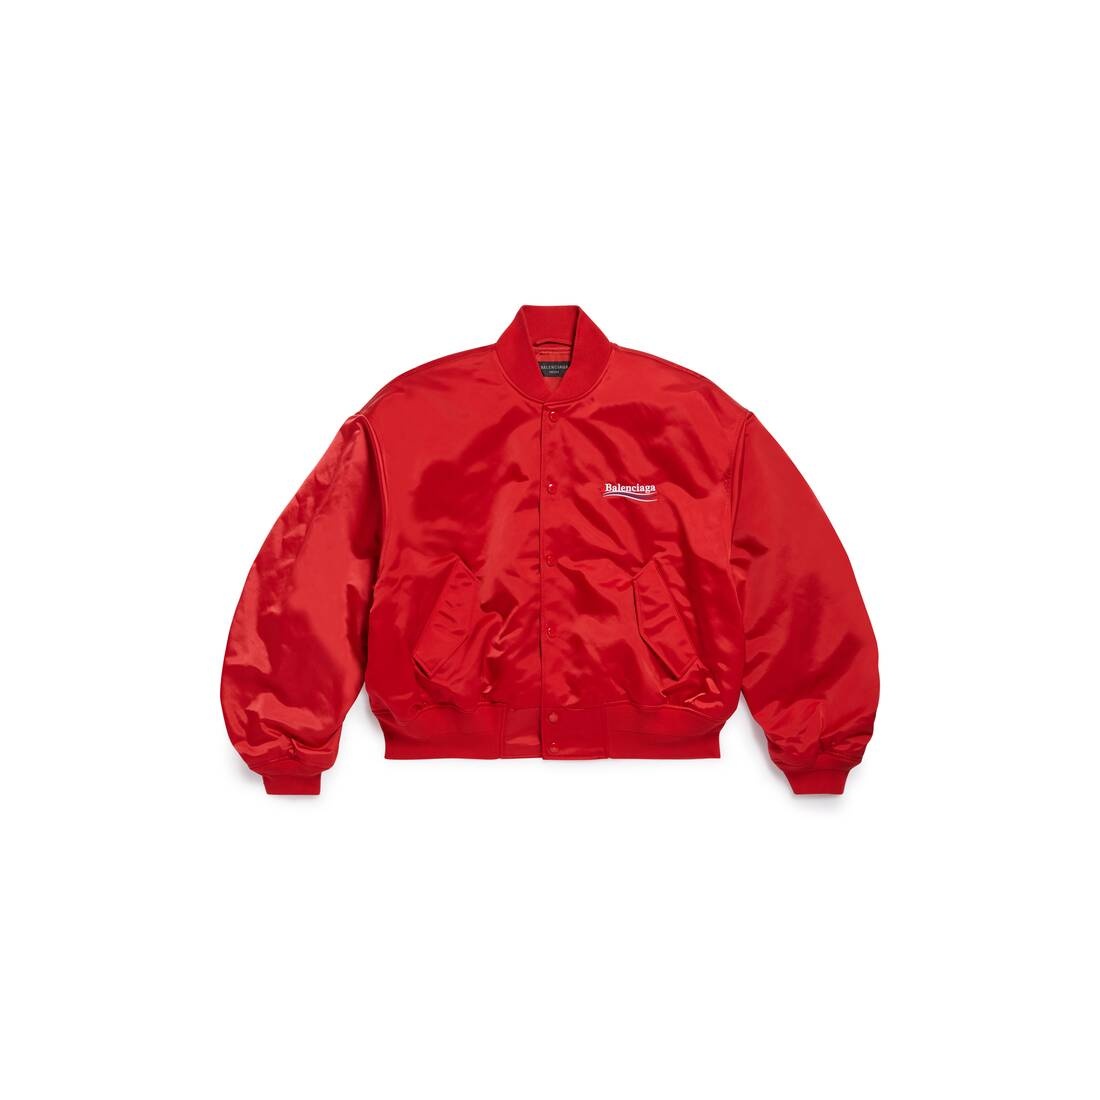 Political Campaign Varsity Jacket in Bright Red - 1